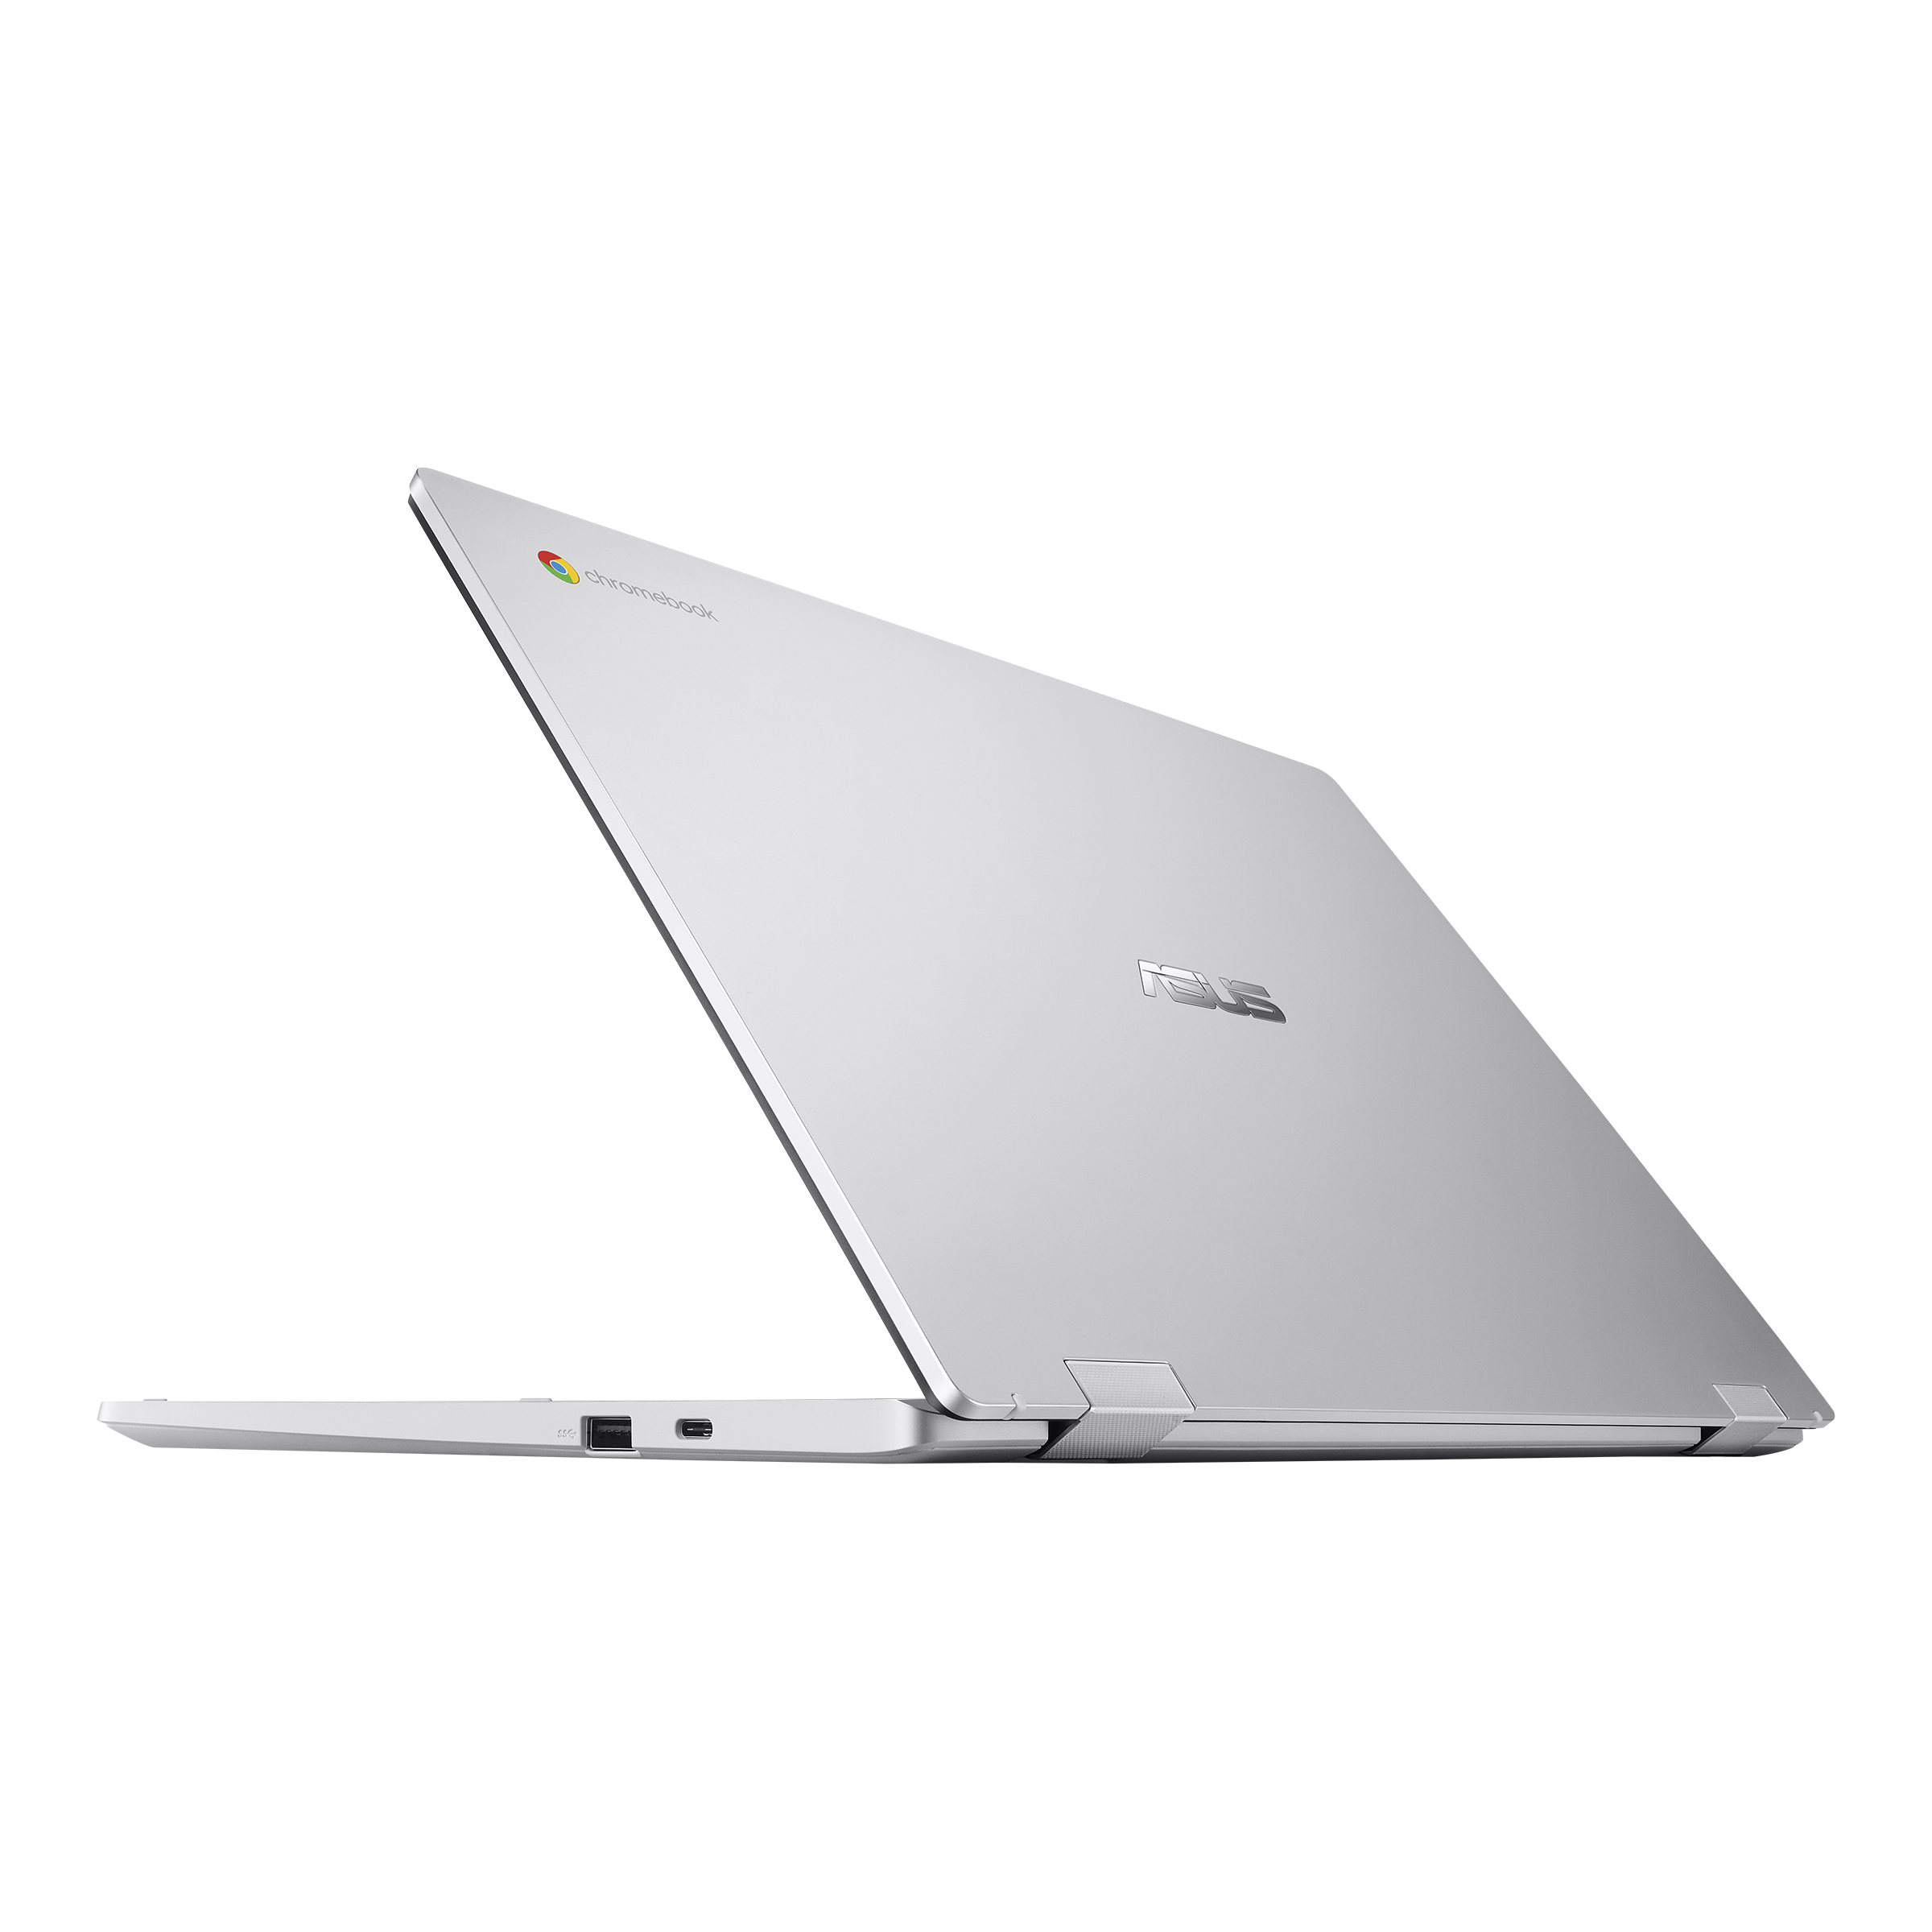 ASUS Chromebook CX1 (CX1500)｜Laptops For Home｜ASUS USA